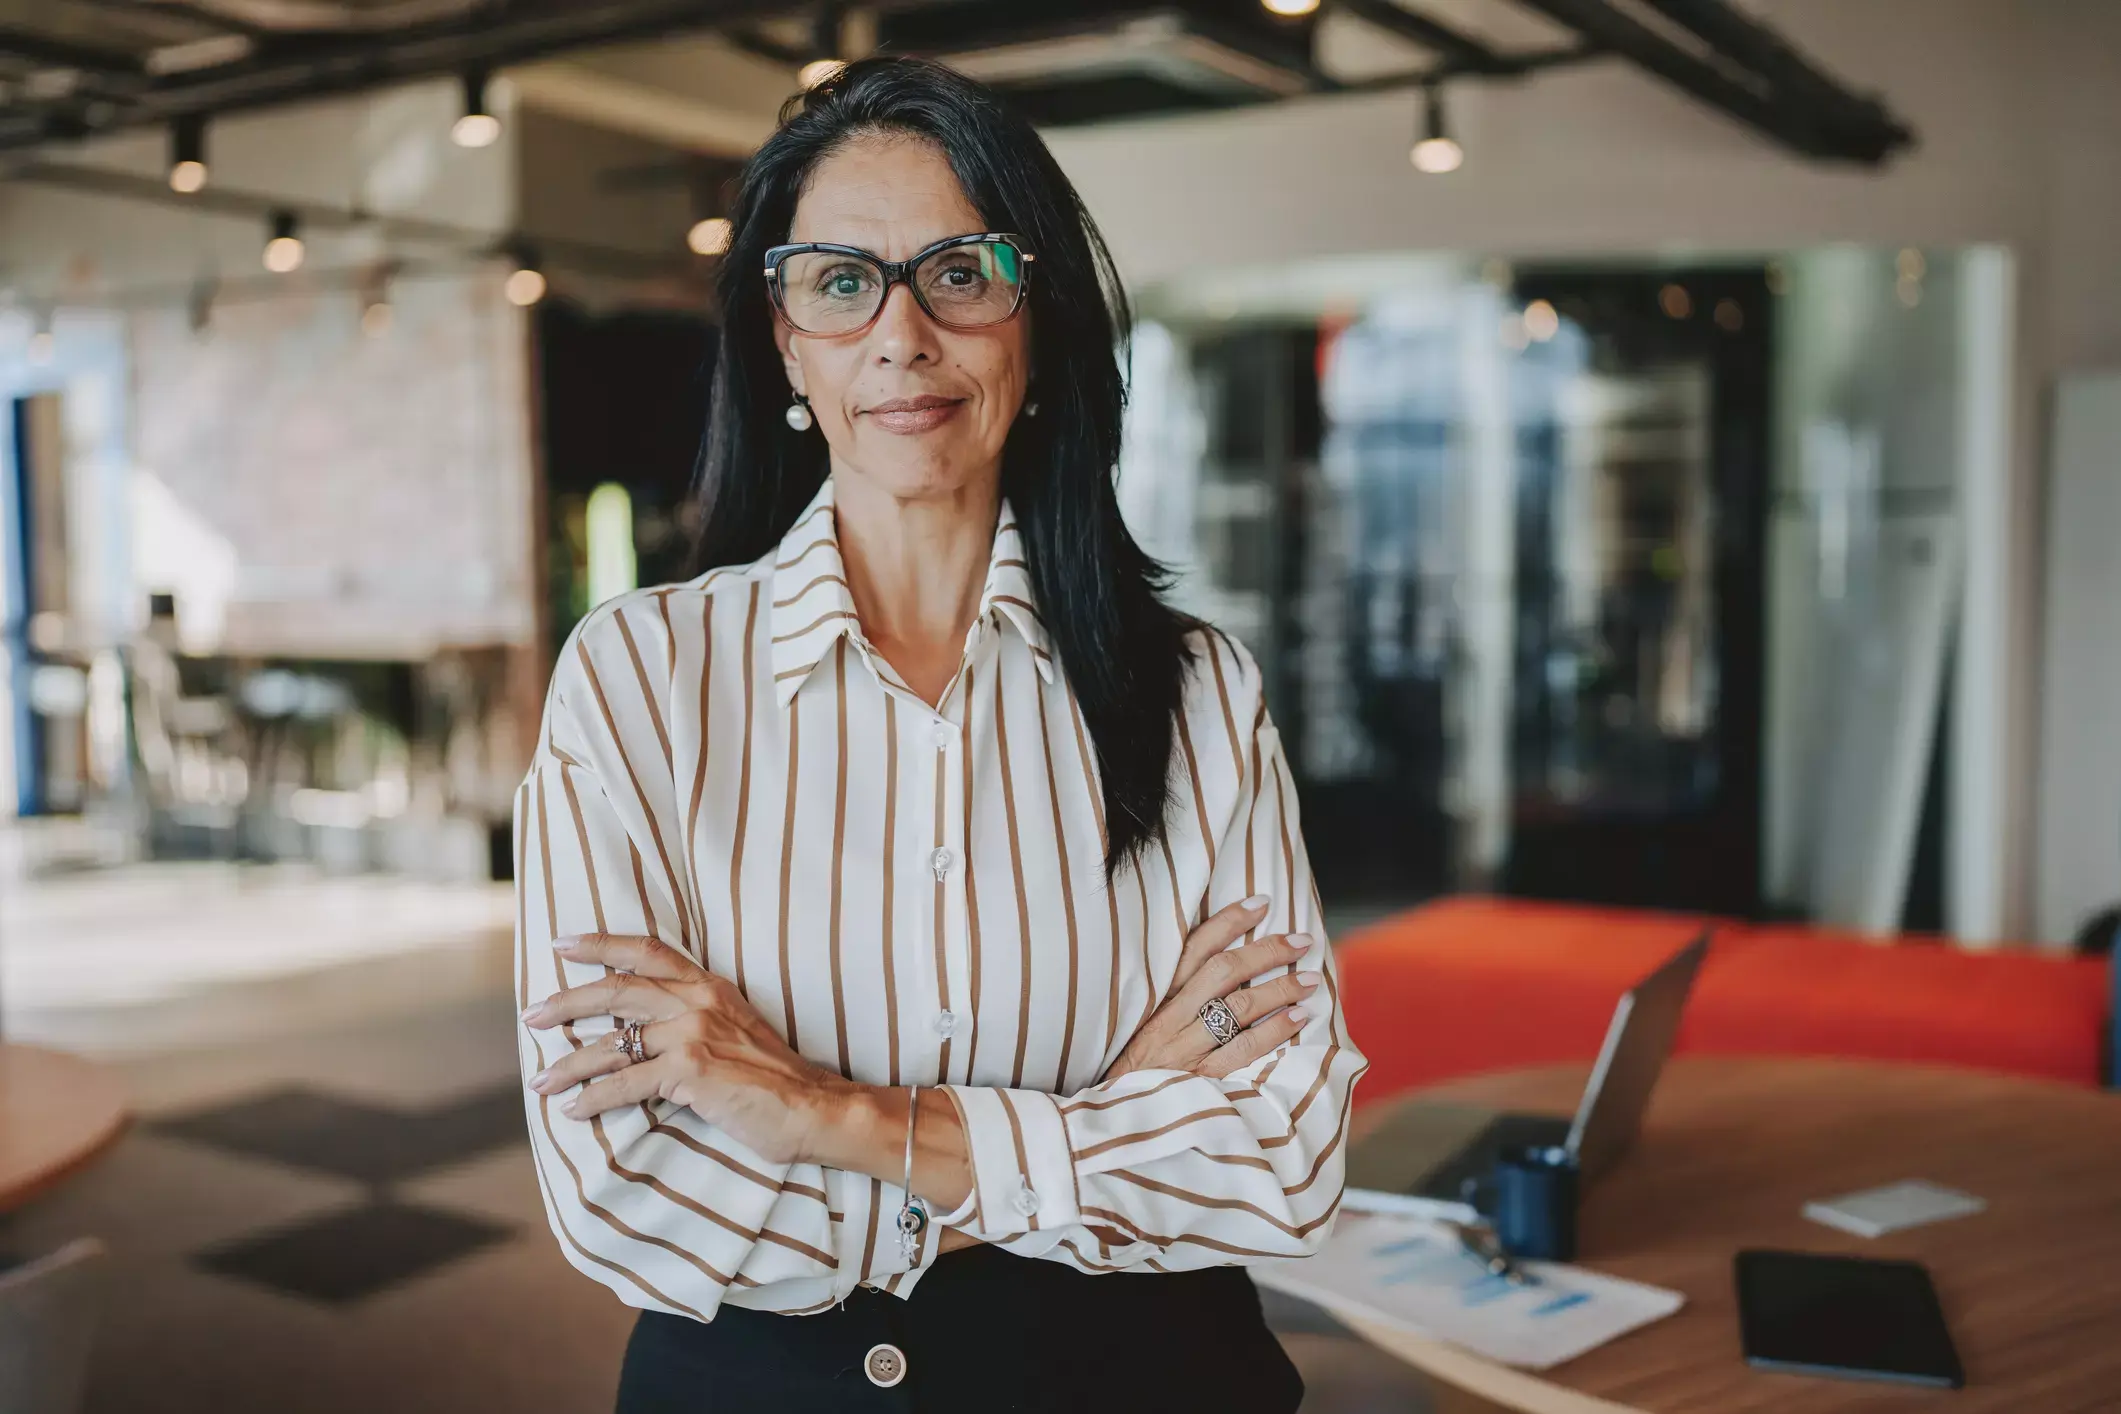 Mature professional woman in striped shirt stands confidently in modern office, arms crossed, ready to advise entrepreneurs